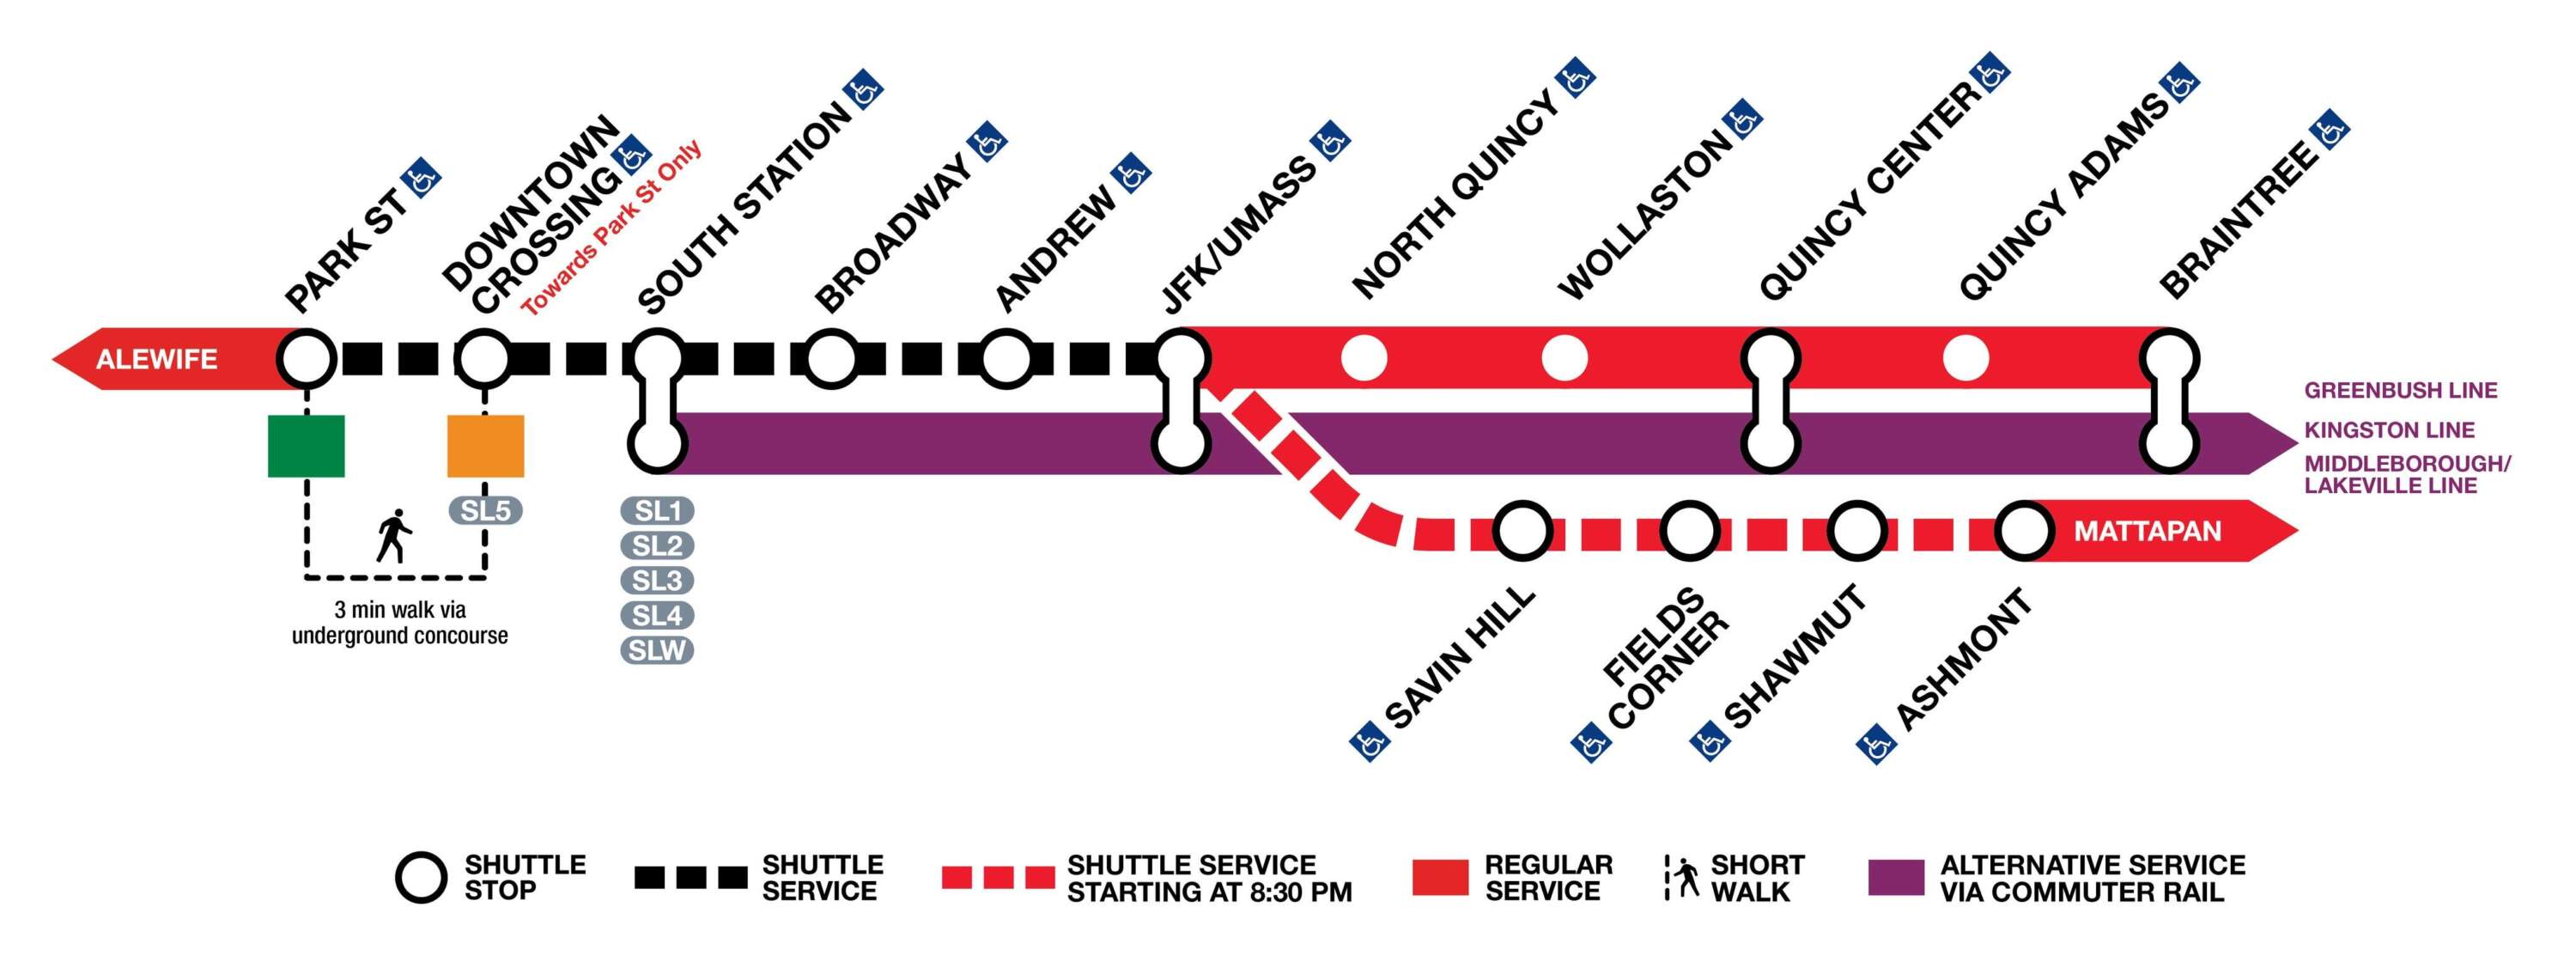 Click the image above for more details on how to get around the Red Line closure. (Courtesy of the MBTA)